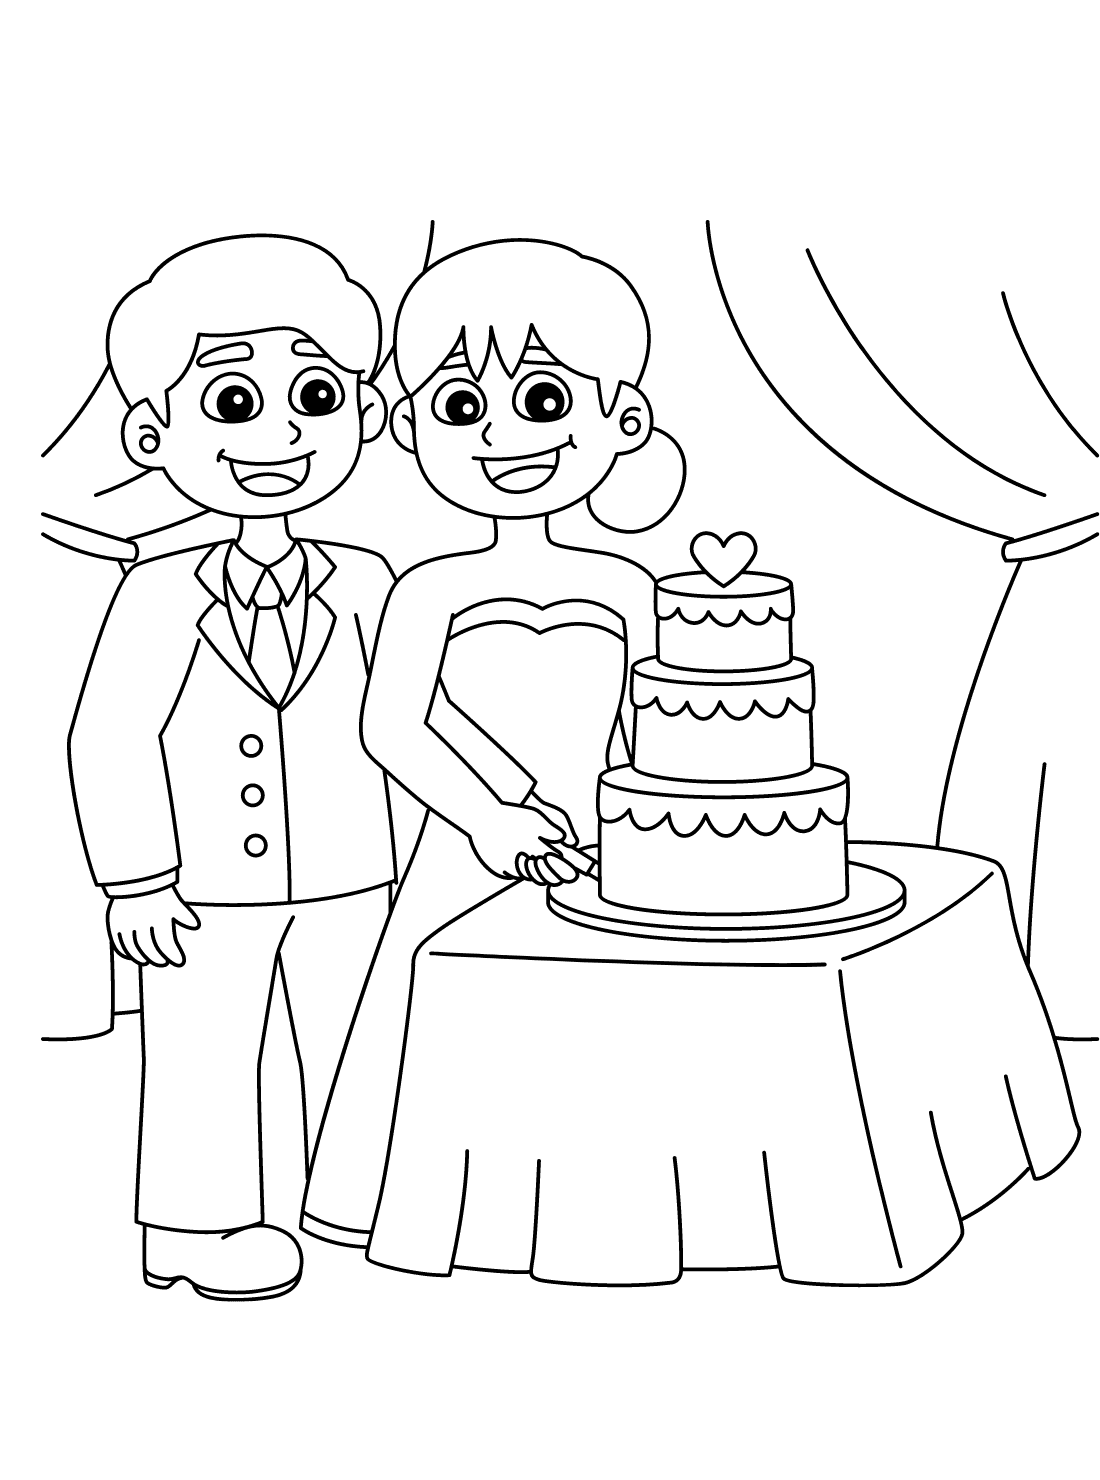 Wedding Cake With Bride and Groom